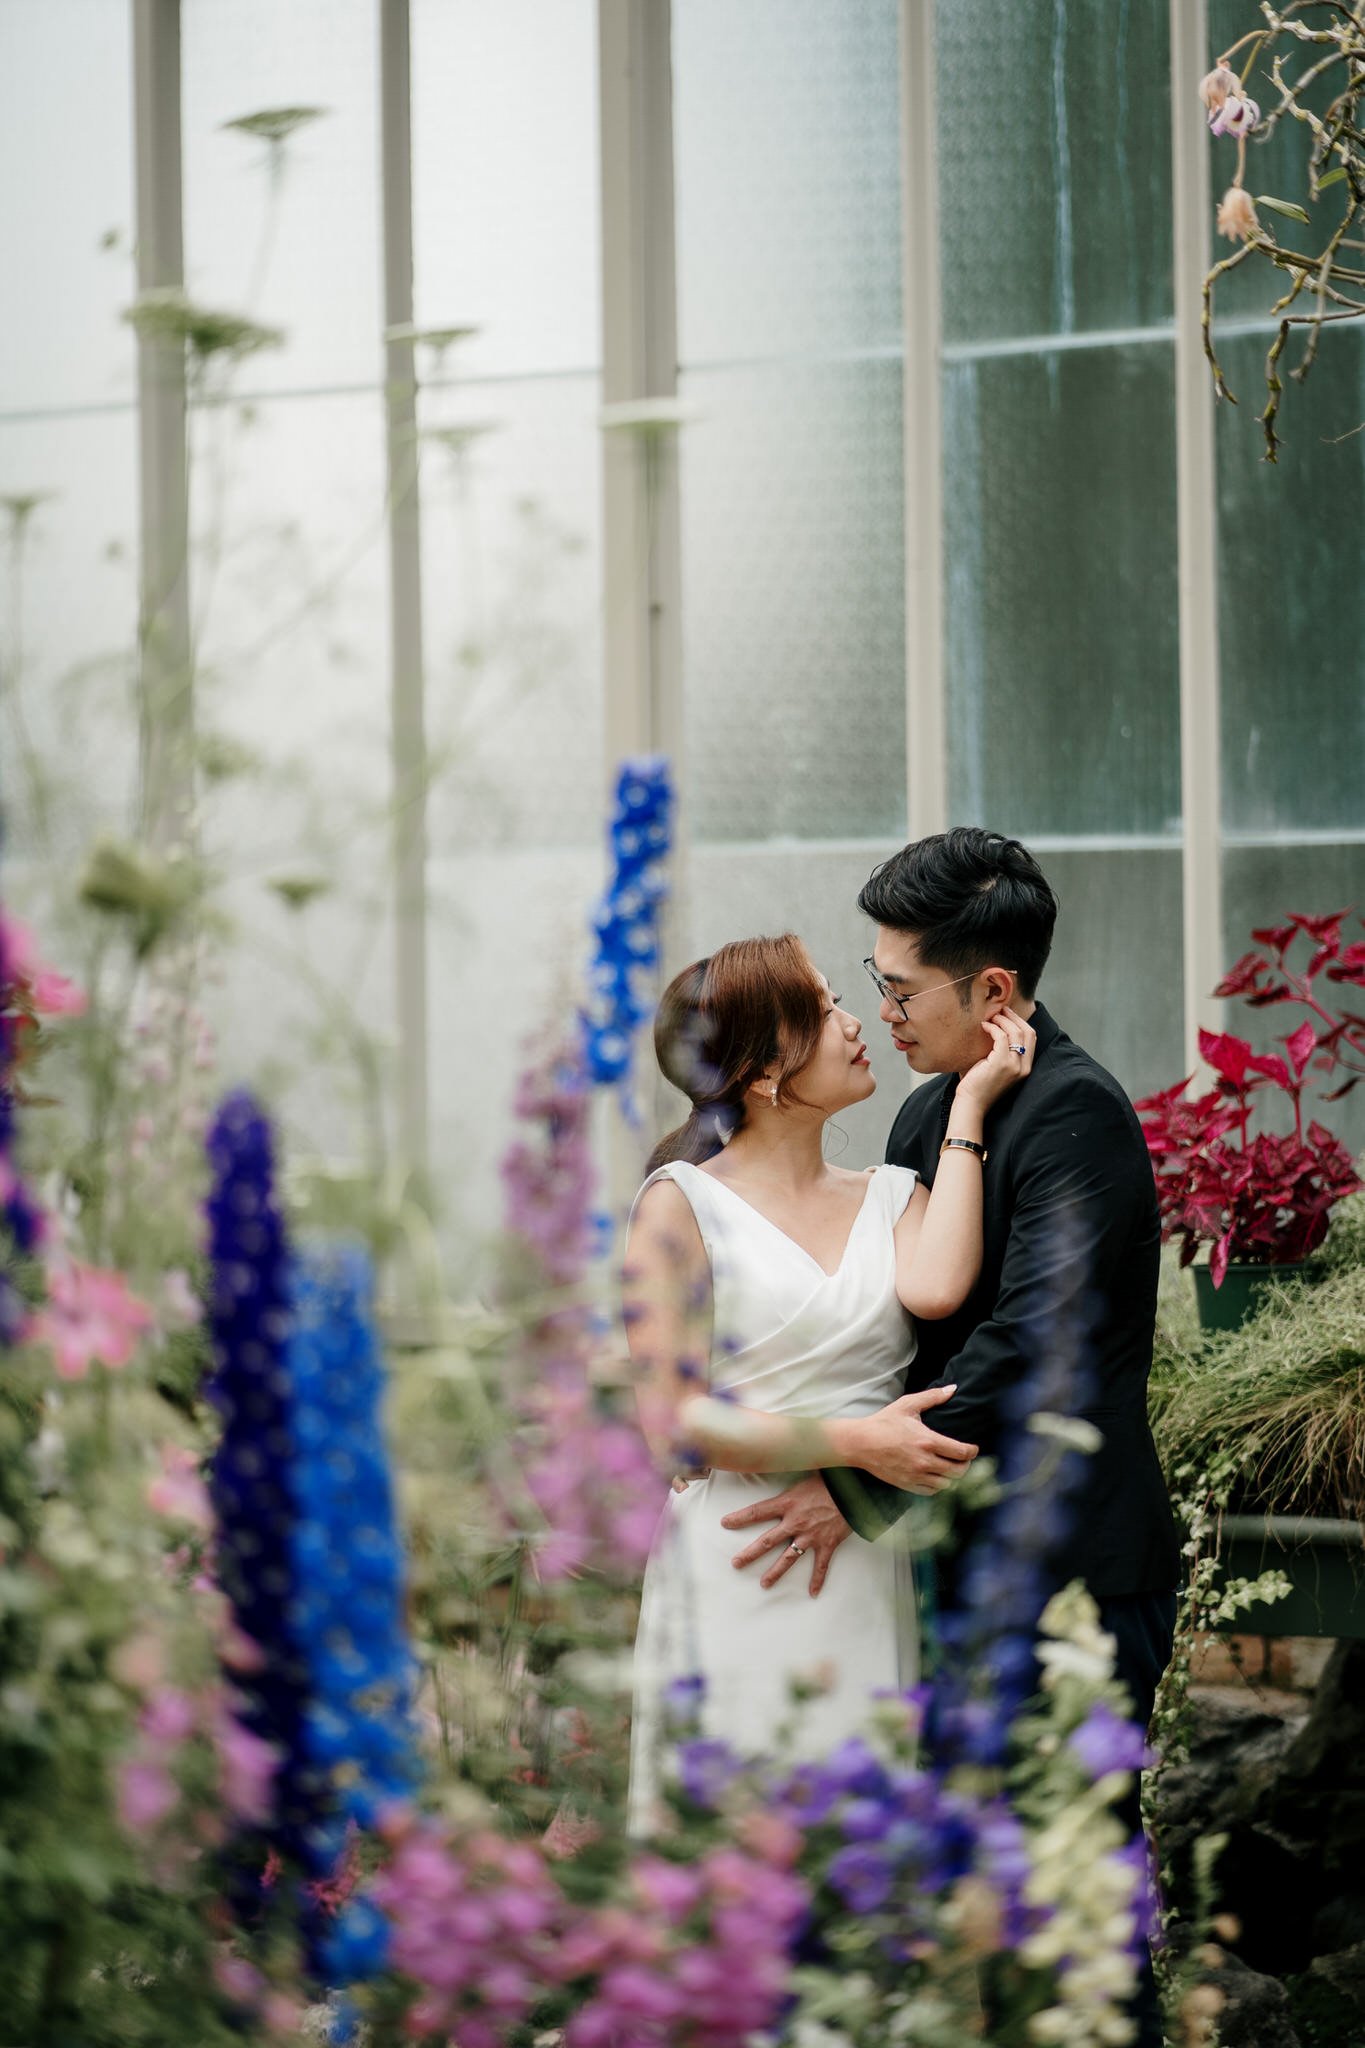 auckland-wedding-photographer-videographer-story-by-koo-koo's-jewelry-dear-white-productions-pre-wedding-engagement-photo-glass-house-botanic-fernery-garden (22).JPG